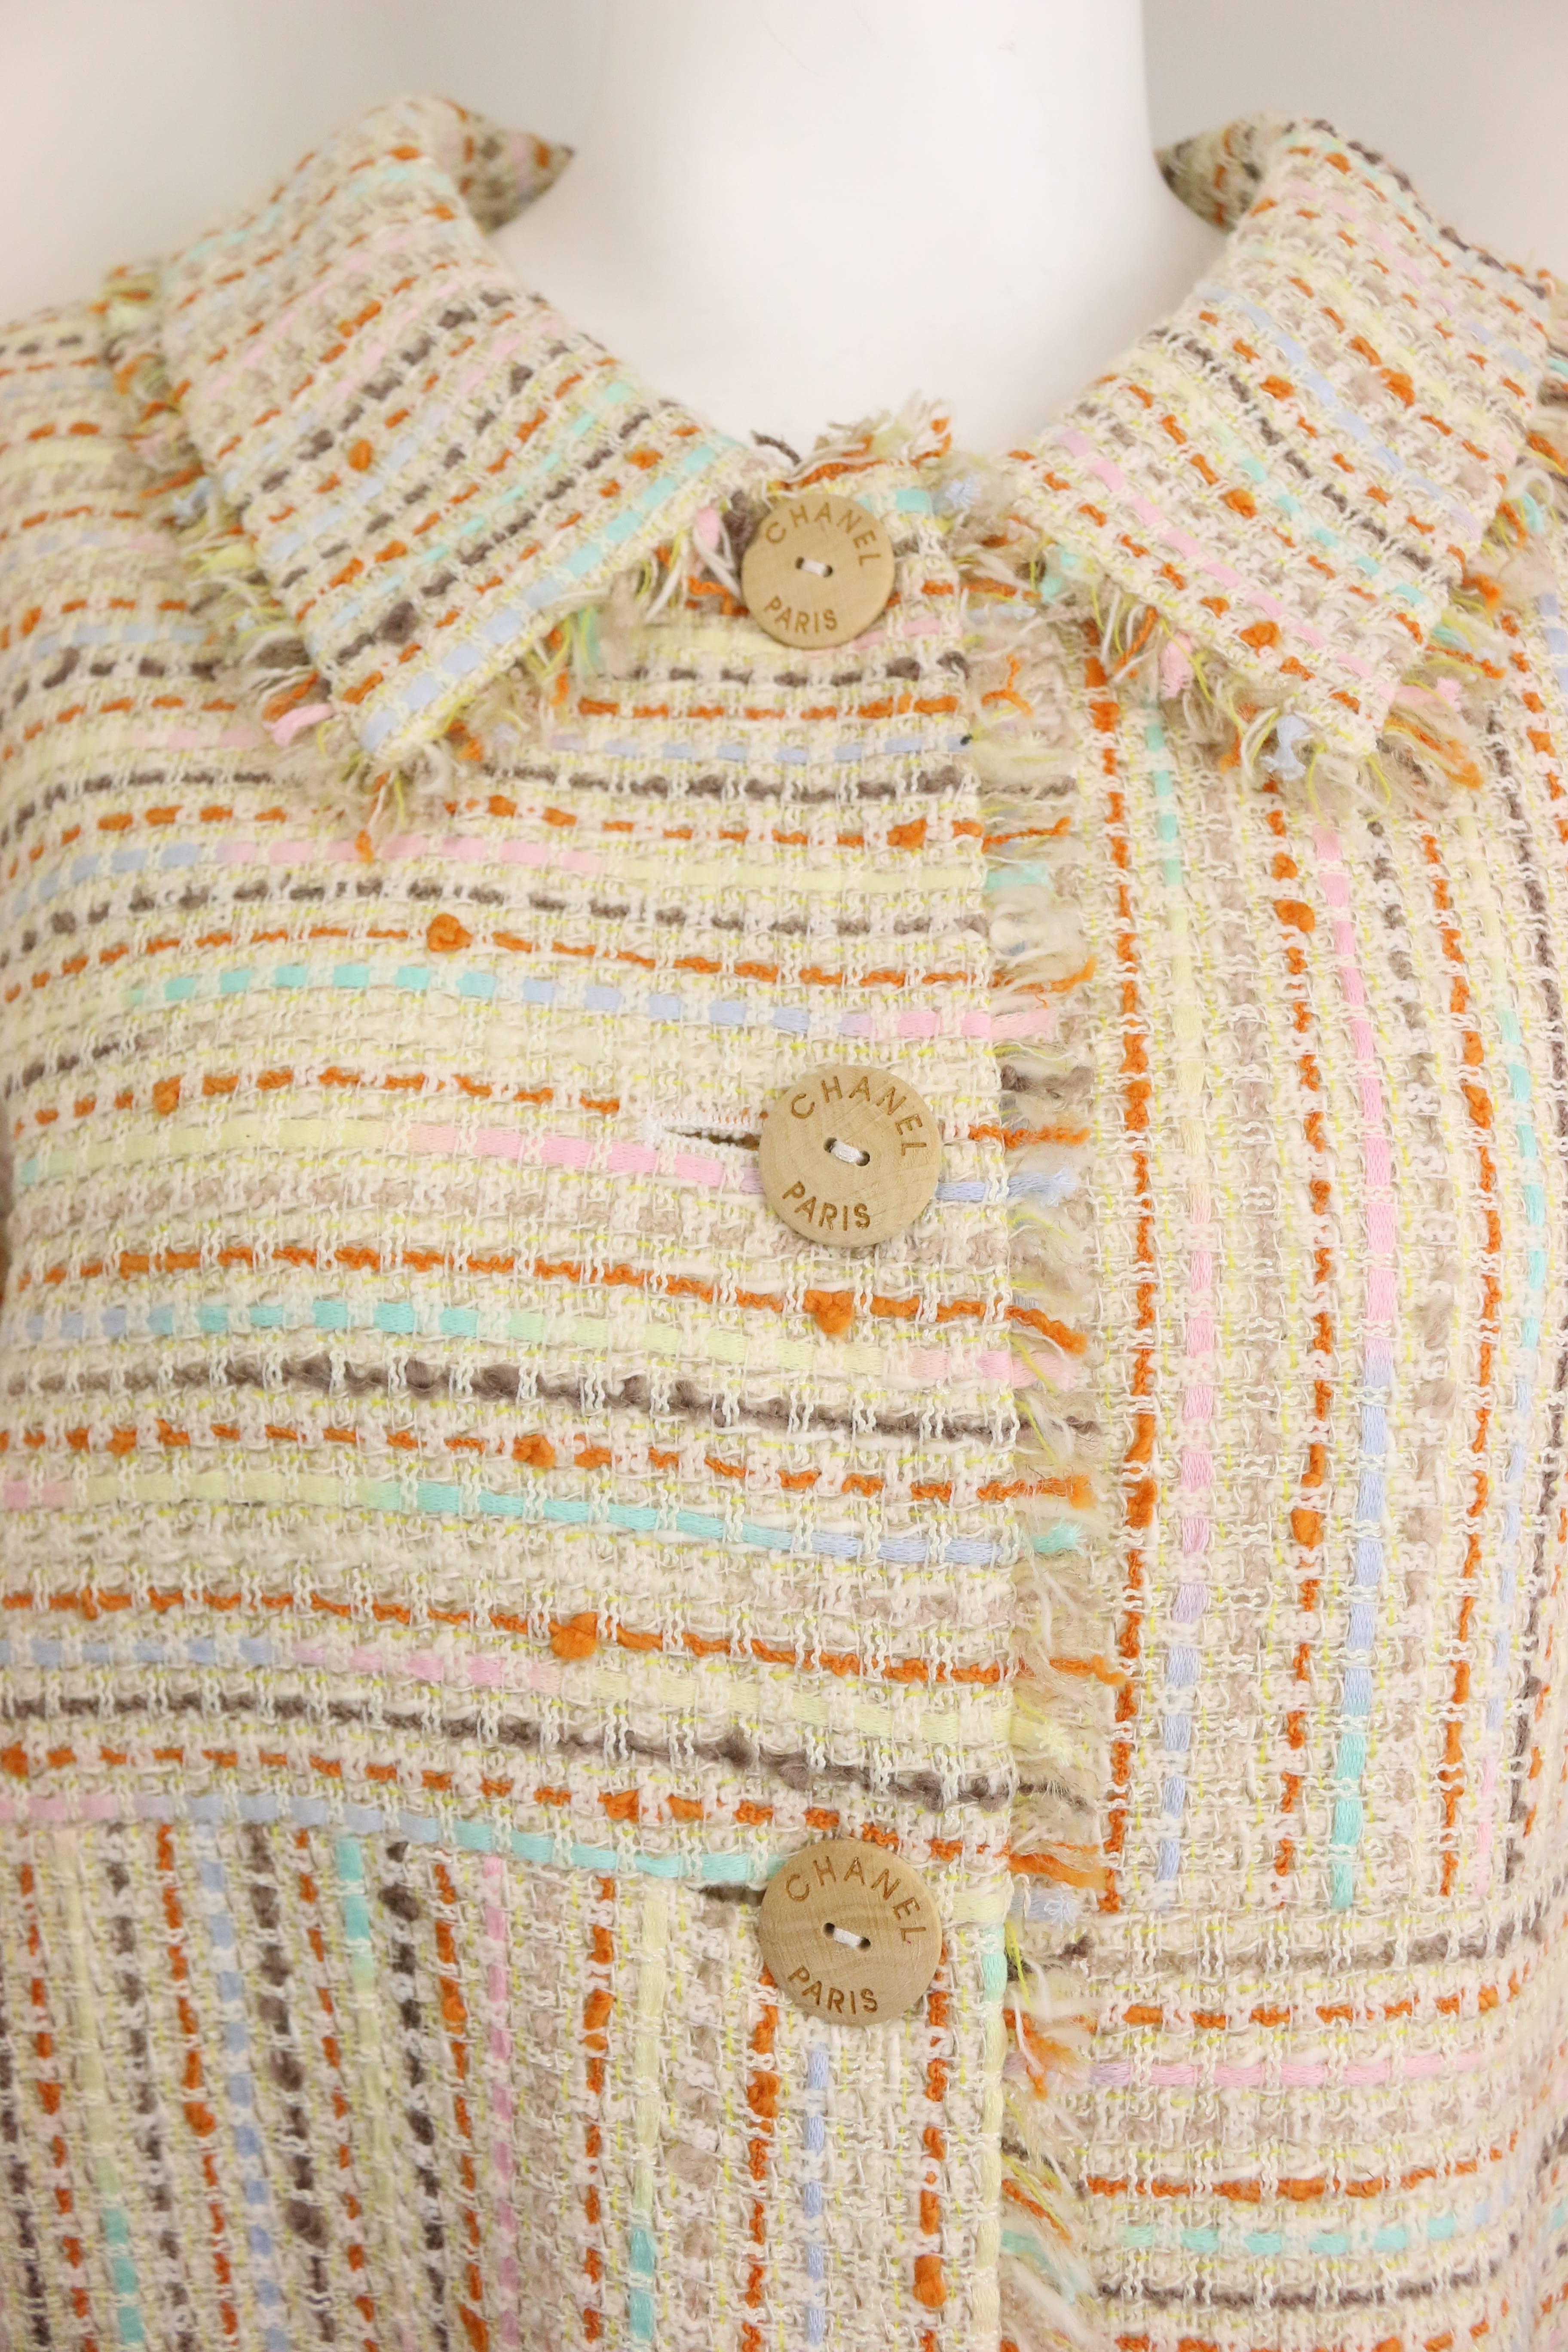 - Chanel multi coloured (beige, orange, yellow, green, pink, blue, purple...) 3/4 sleeves tweed jacket from 2000 Cruise collection. Featuring three 